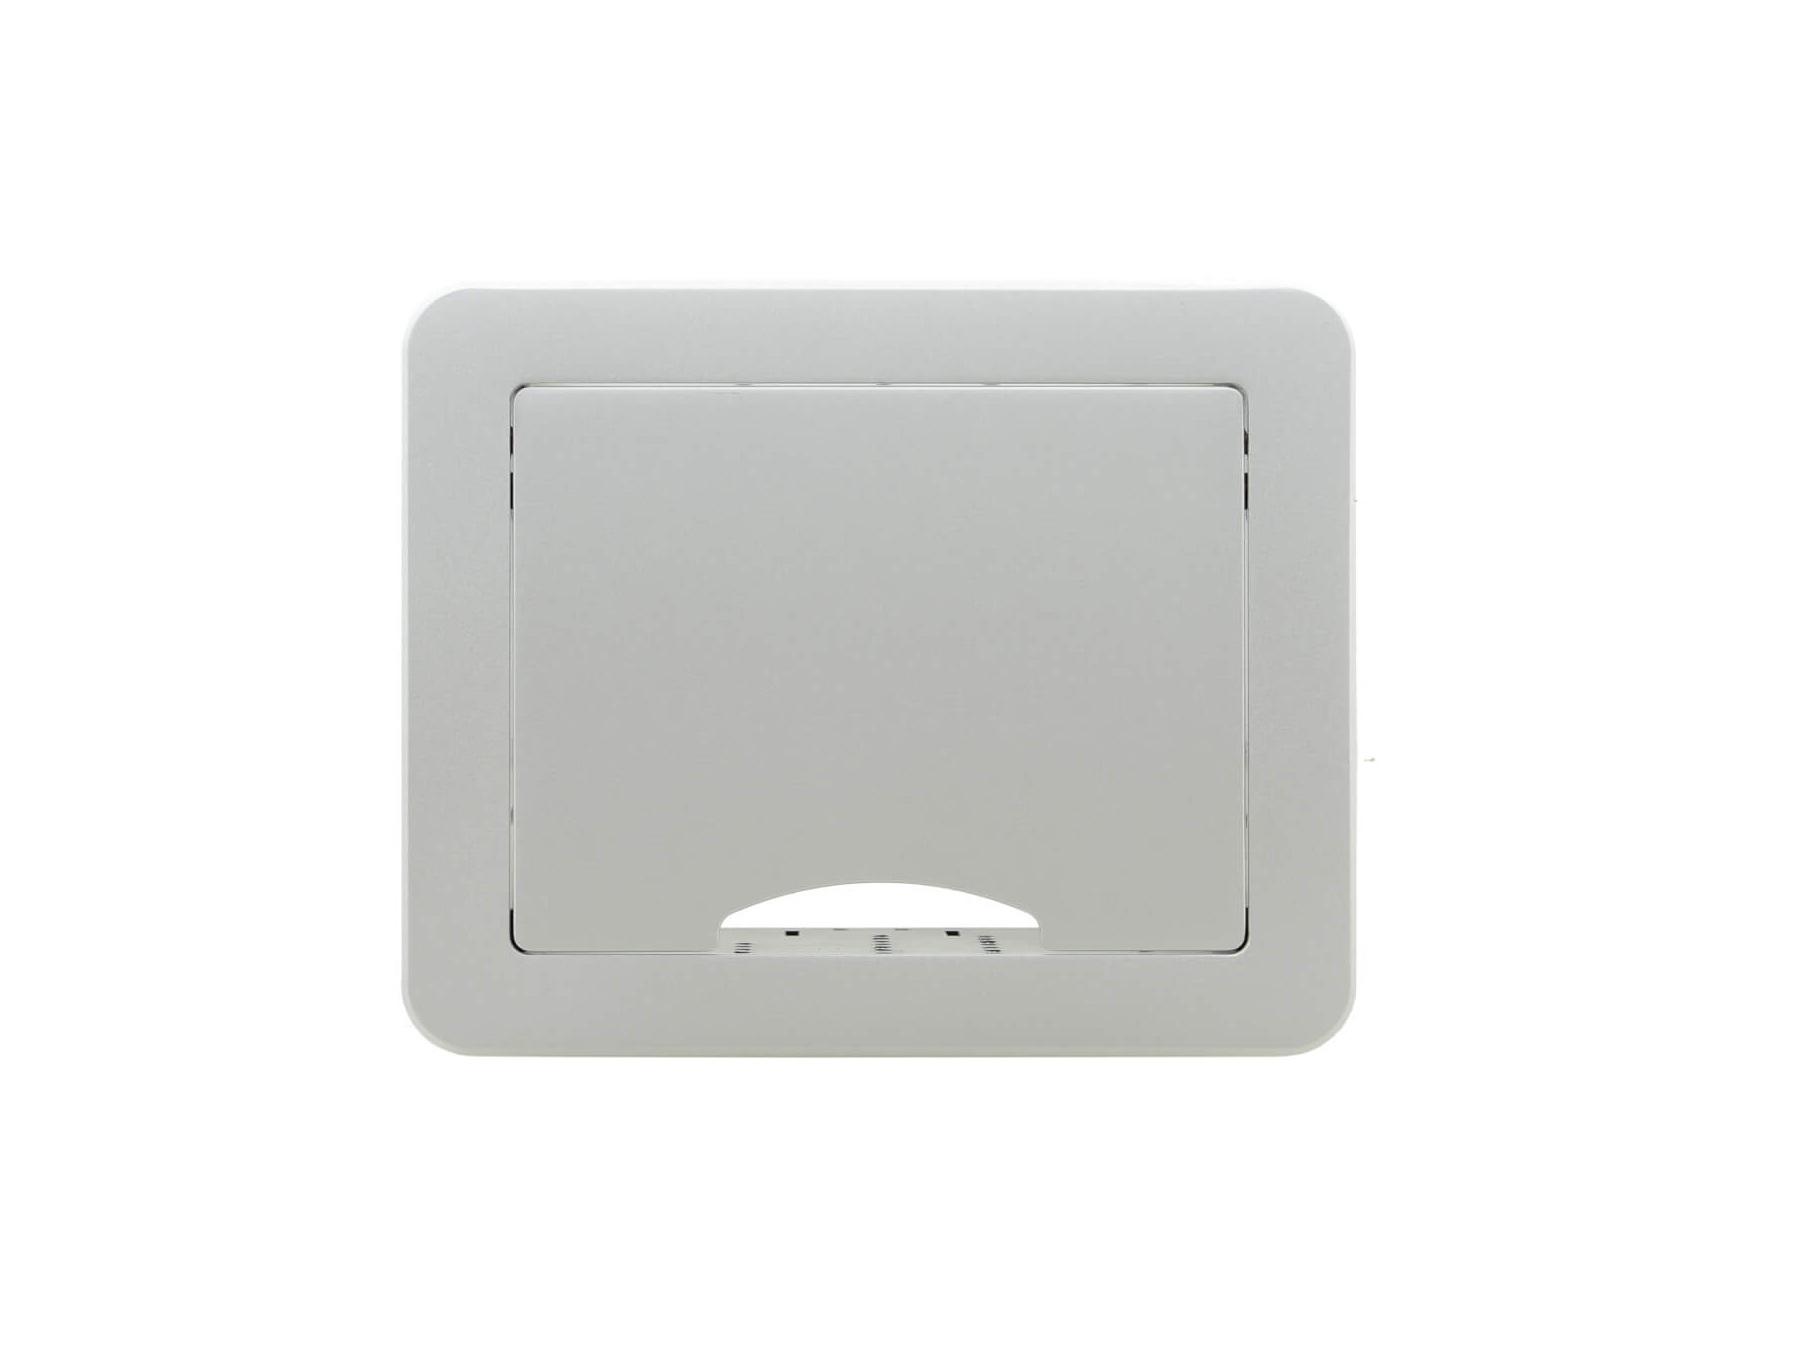 TBUS-1Axl(BC) Table Mount Modular Multi-Connection Solution/Brushed Clear by Kramer